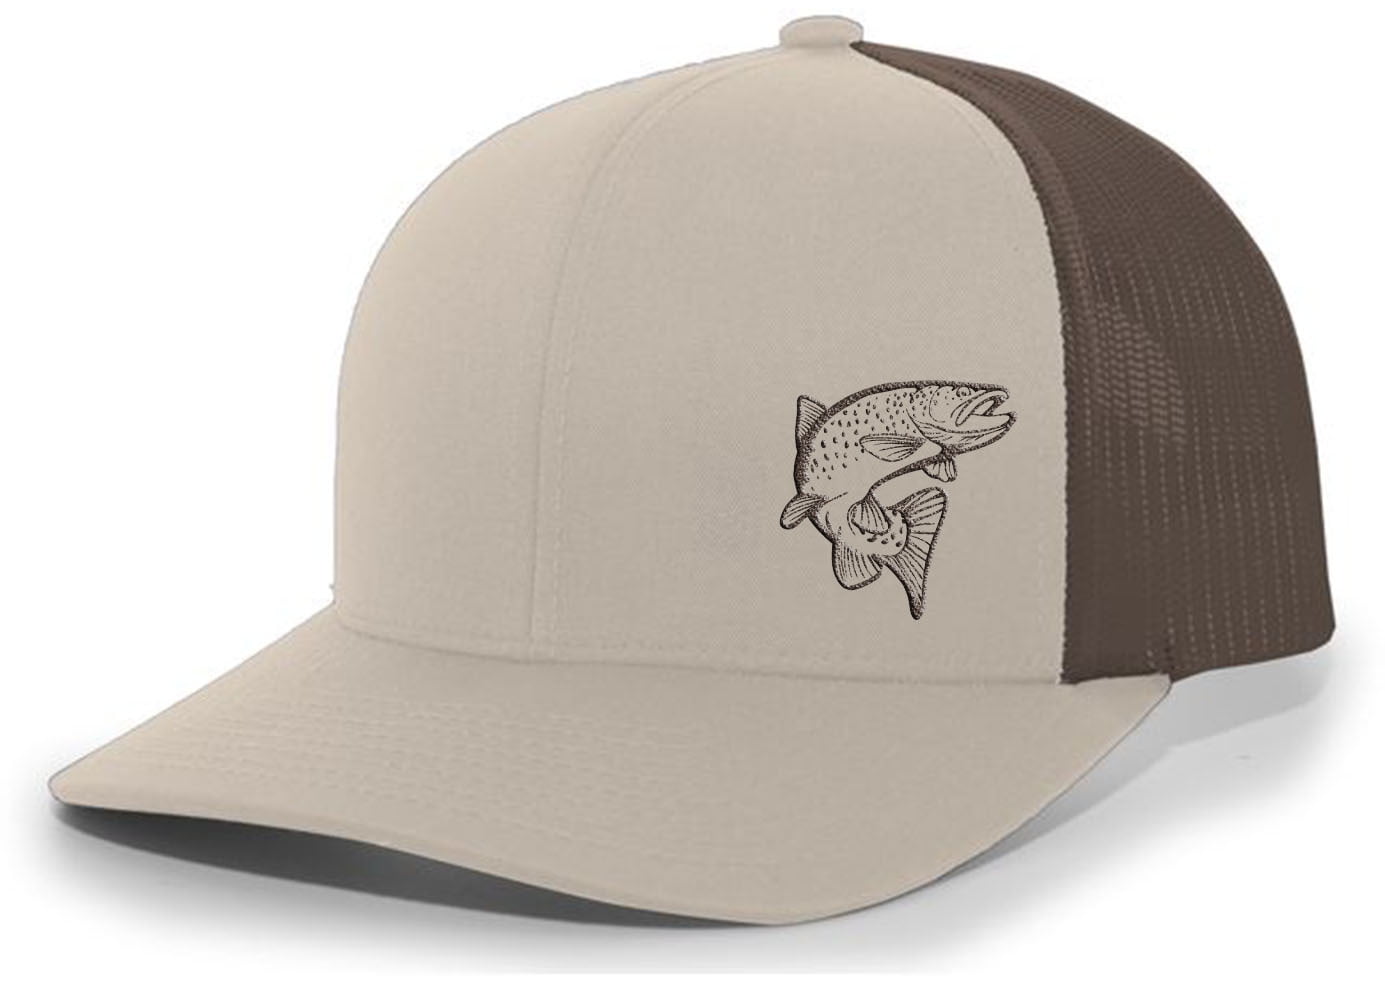 Men's Jumping Trout Fishing Embroidered Mesh Back Trucker Hat, Khaki/Brown